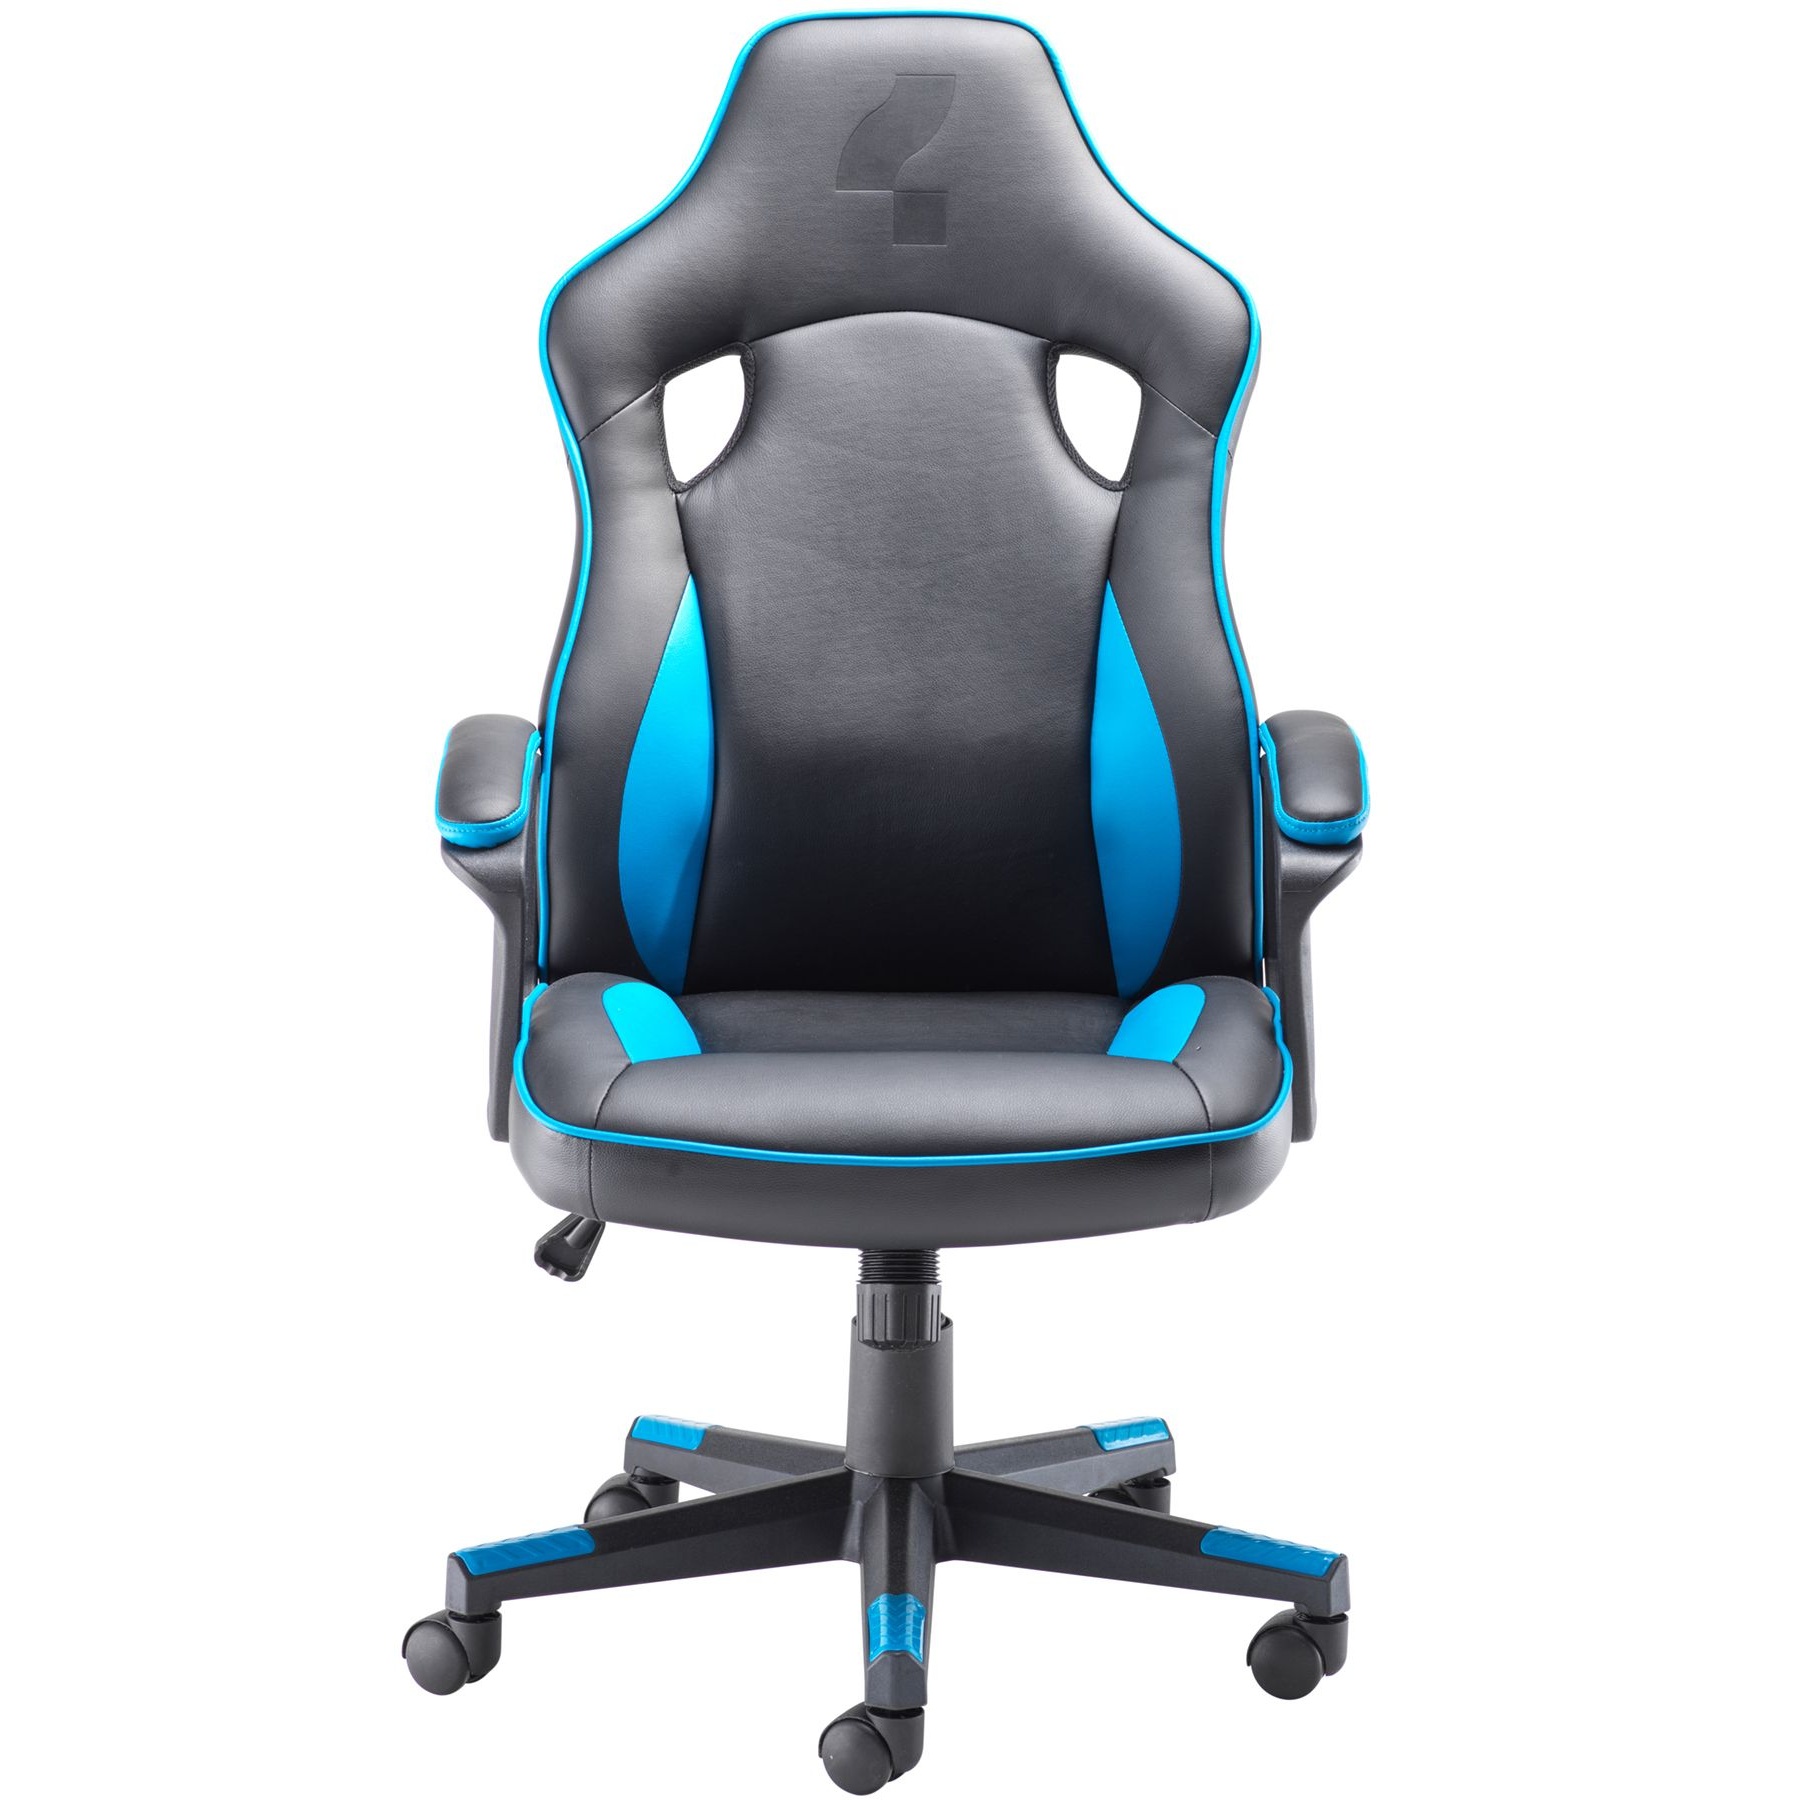 Ludus Executive Gaming Chair from our Executive Office Chairs range.